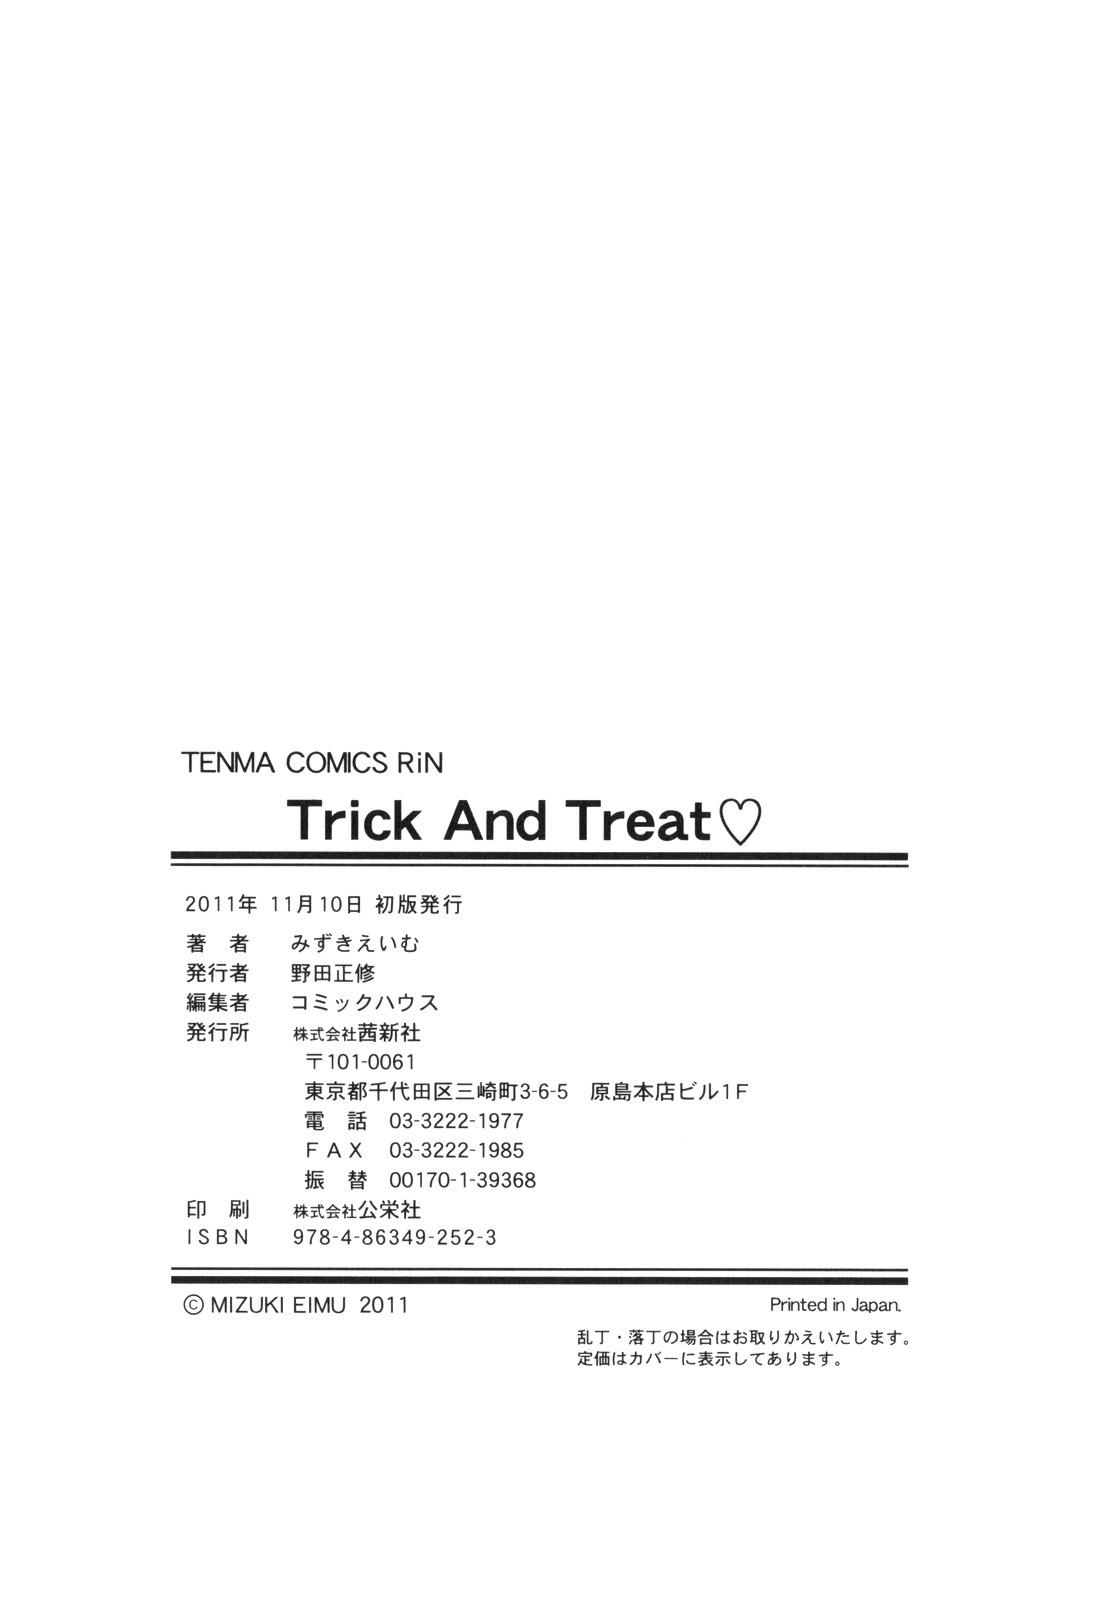 Trick And Treat 207